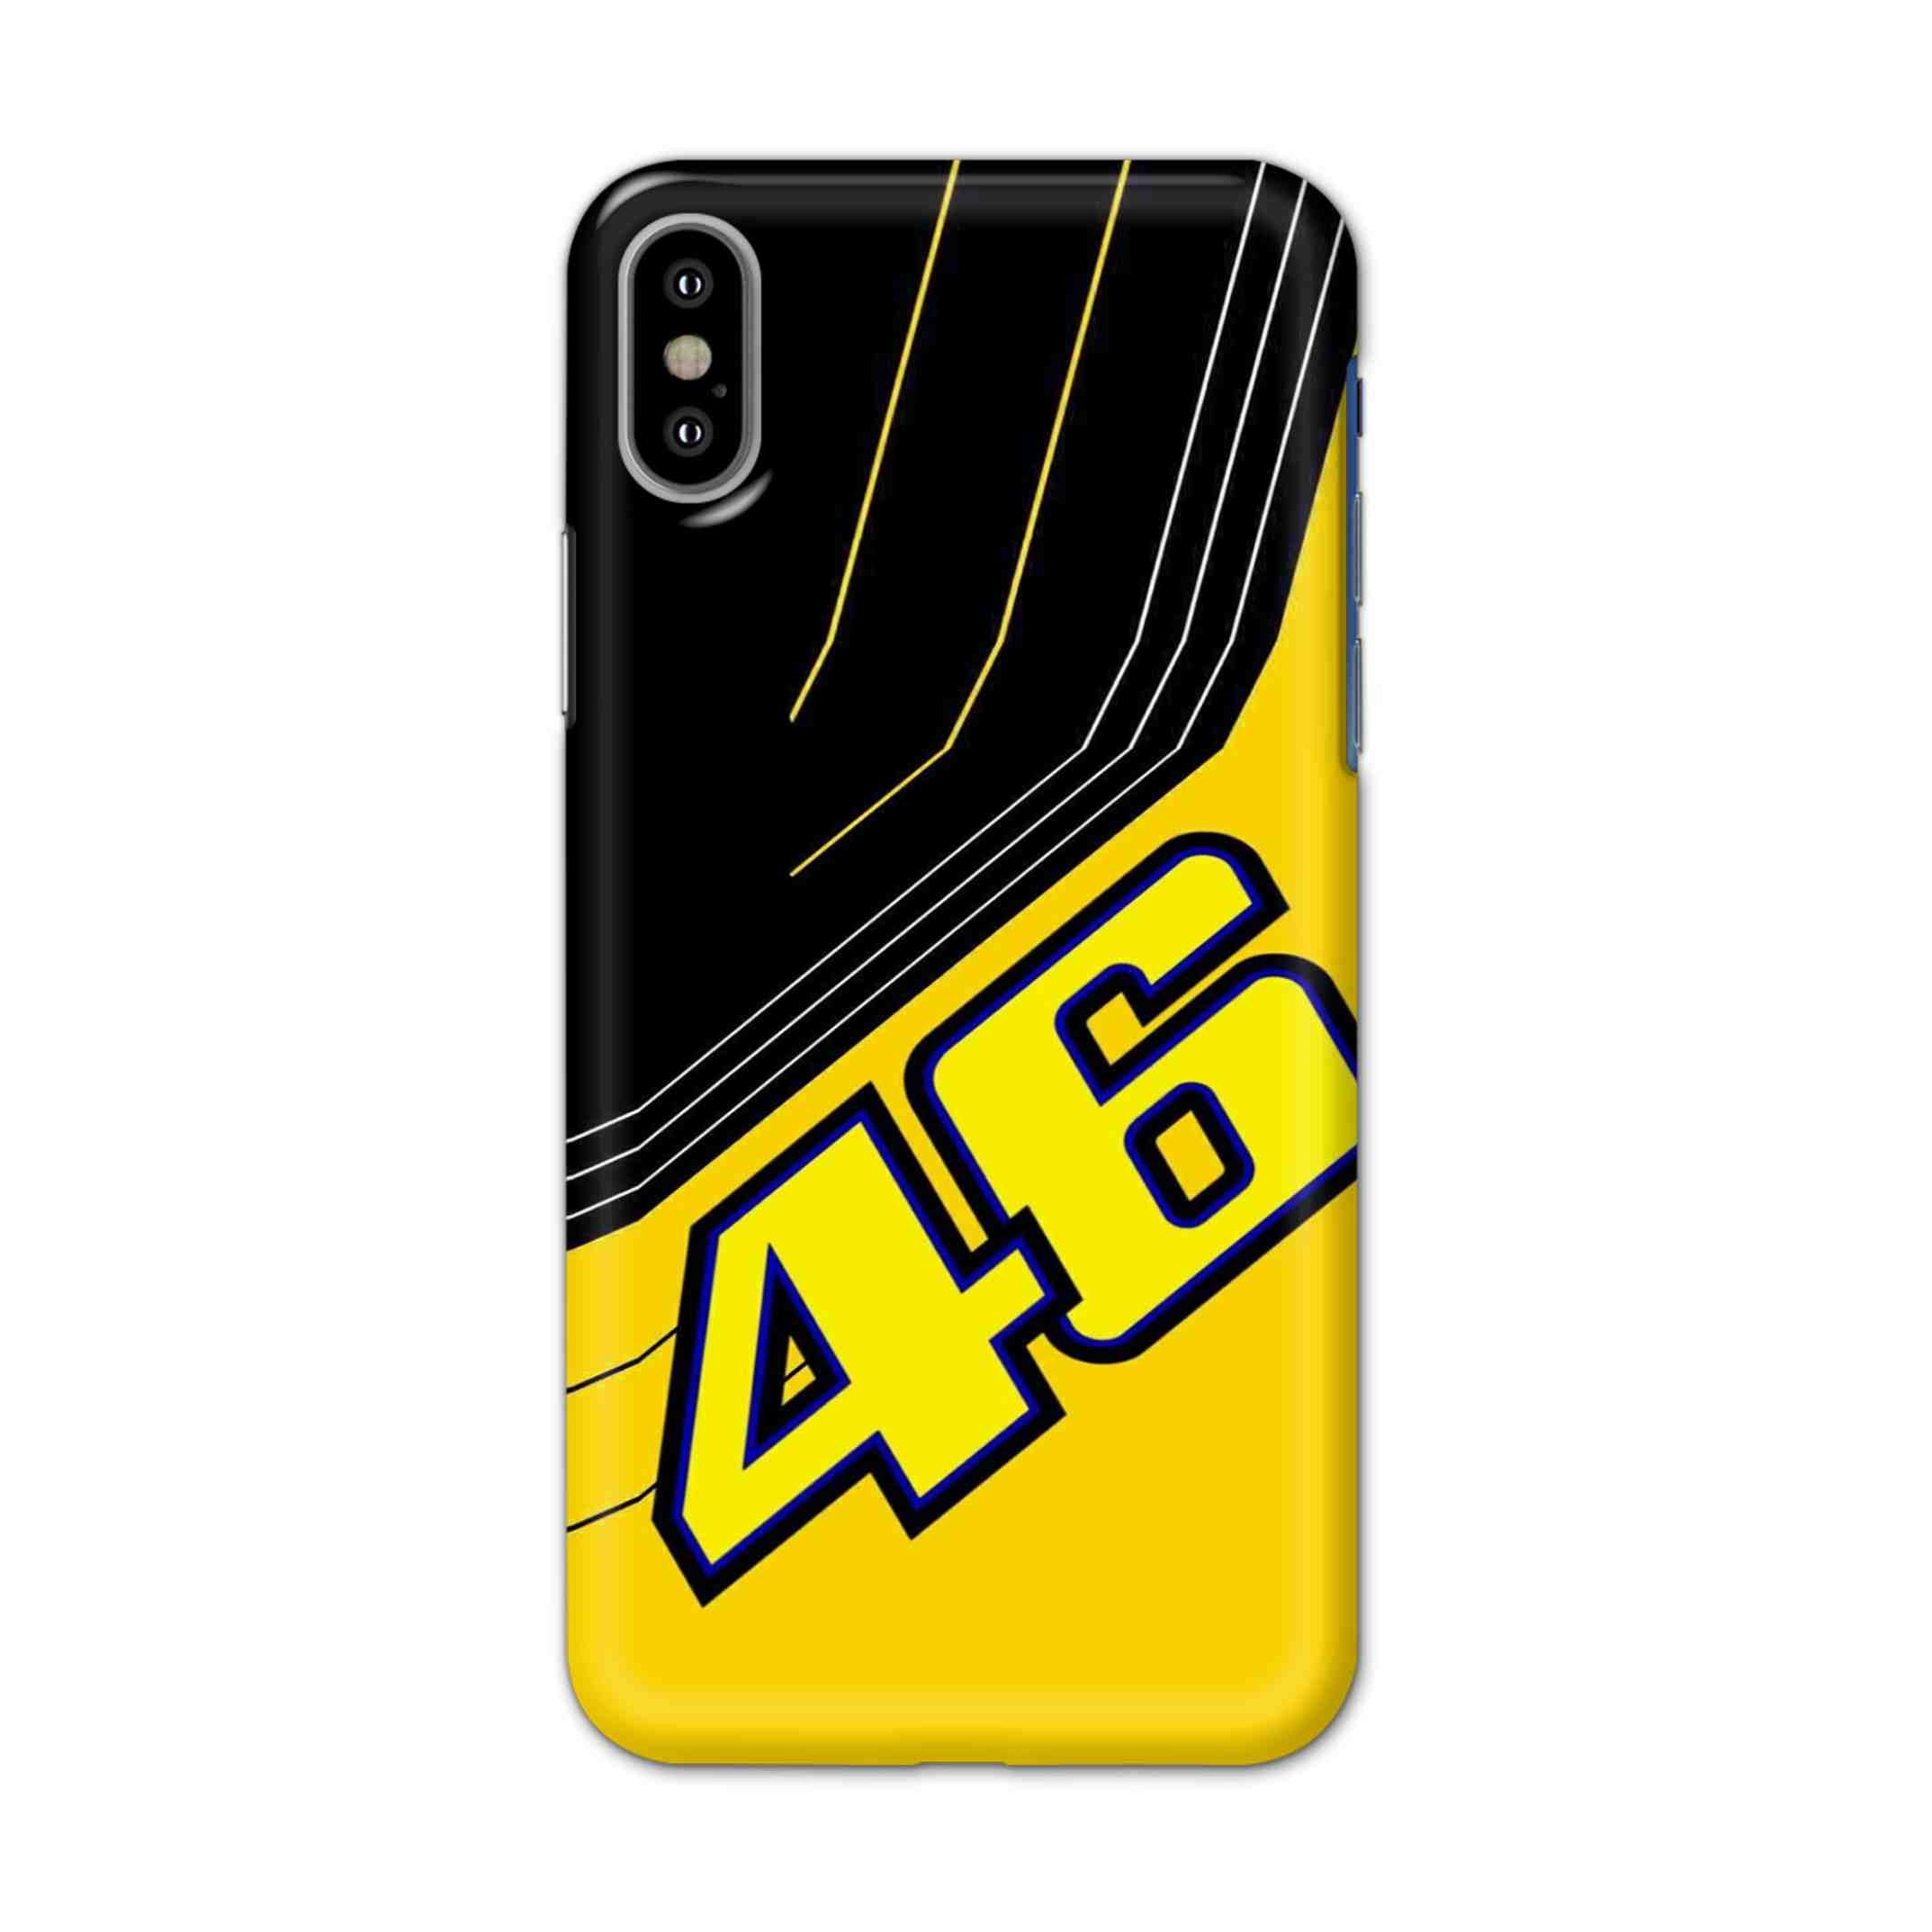 Buy 46 Hard Back Mobile Phone Case/Cover For iPhone X Online